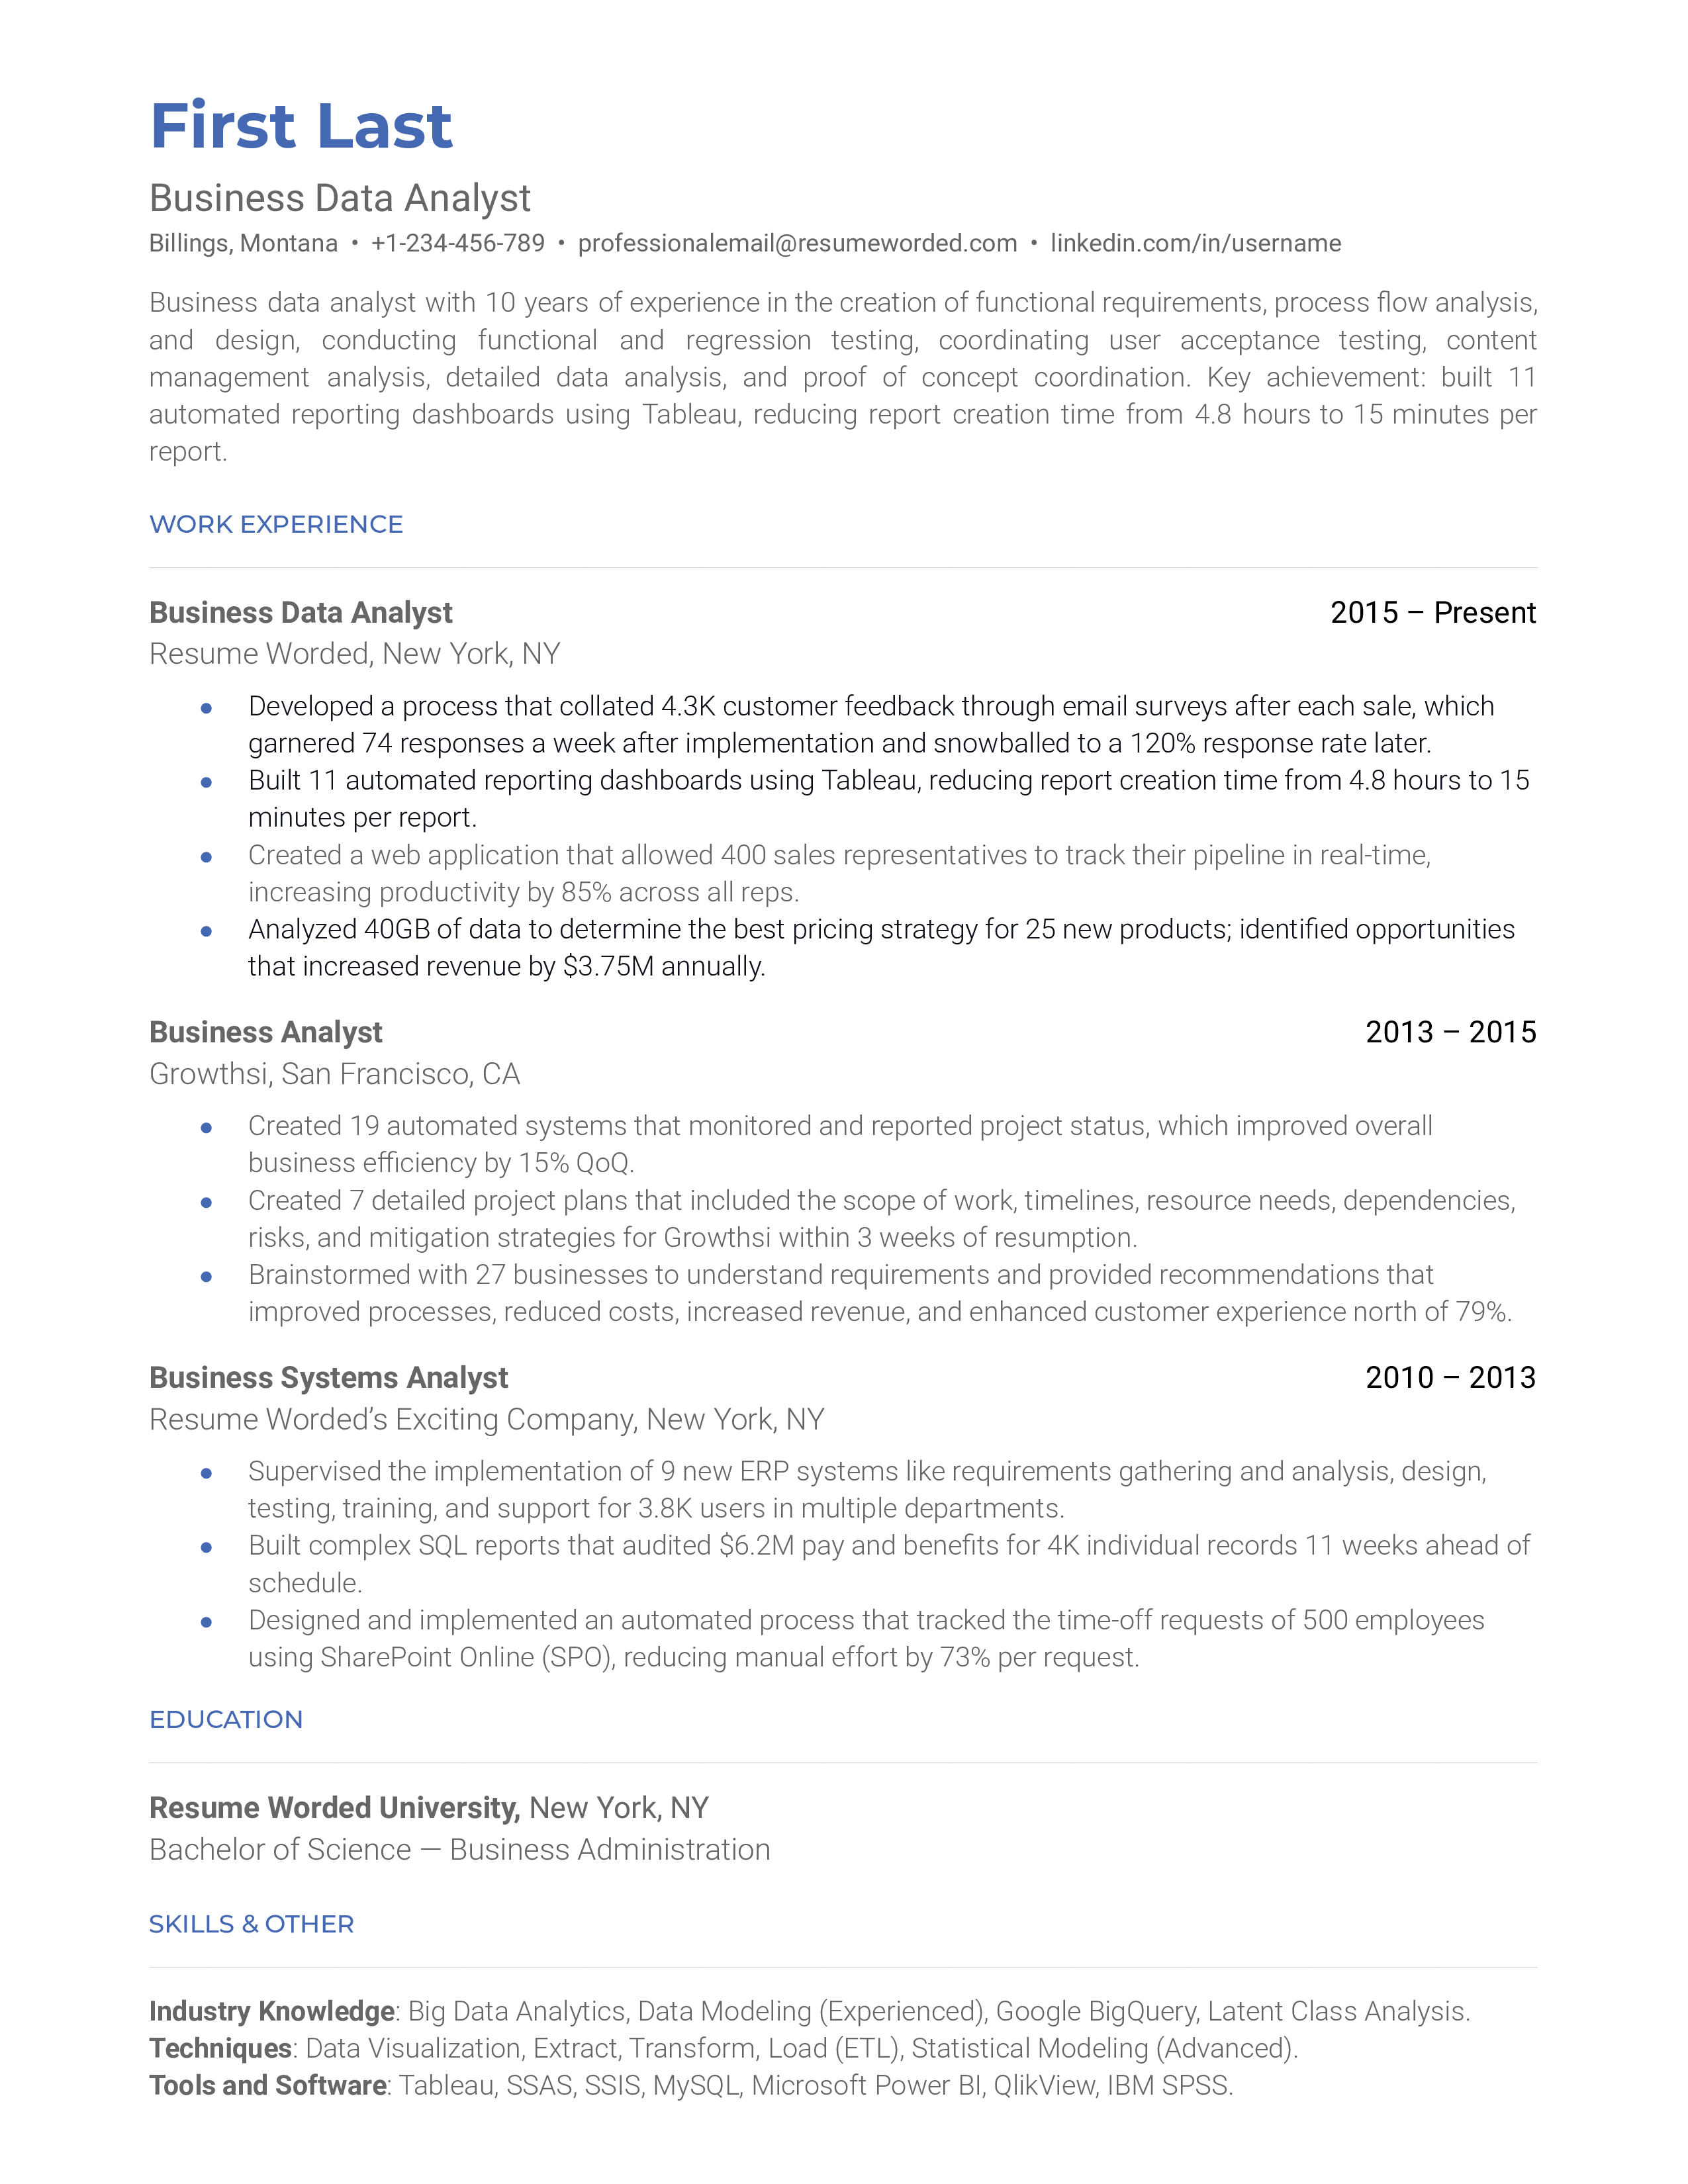 A business data analyst resume sample that highlights the applicant's achievements and impact on the bottom line.